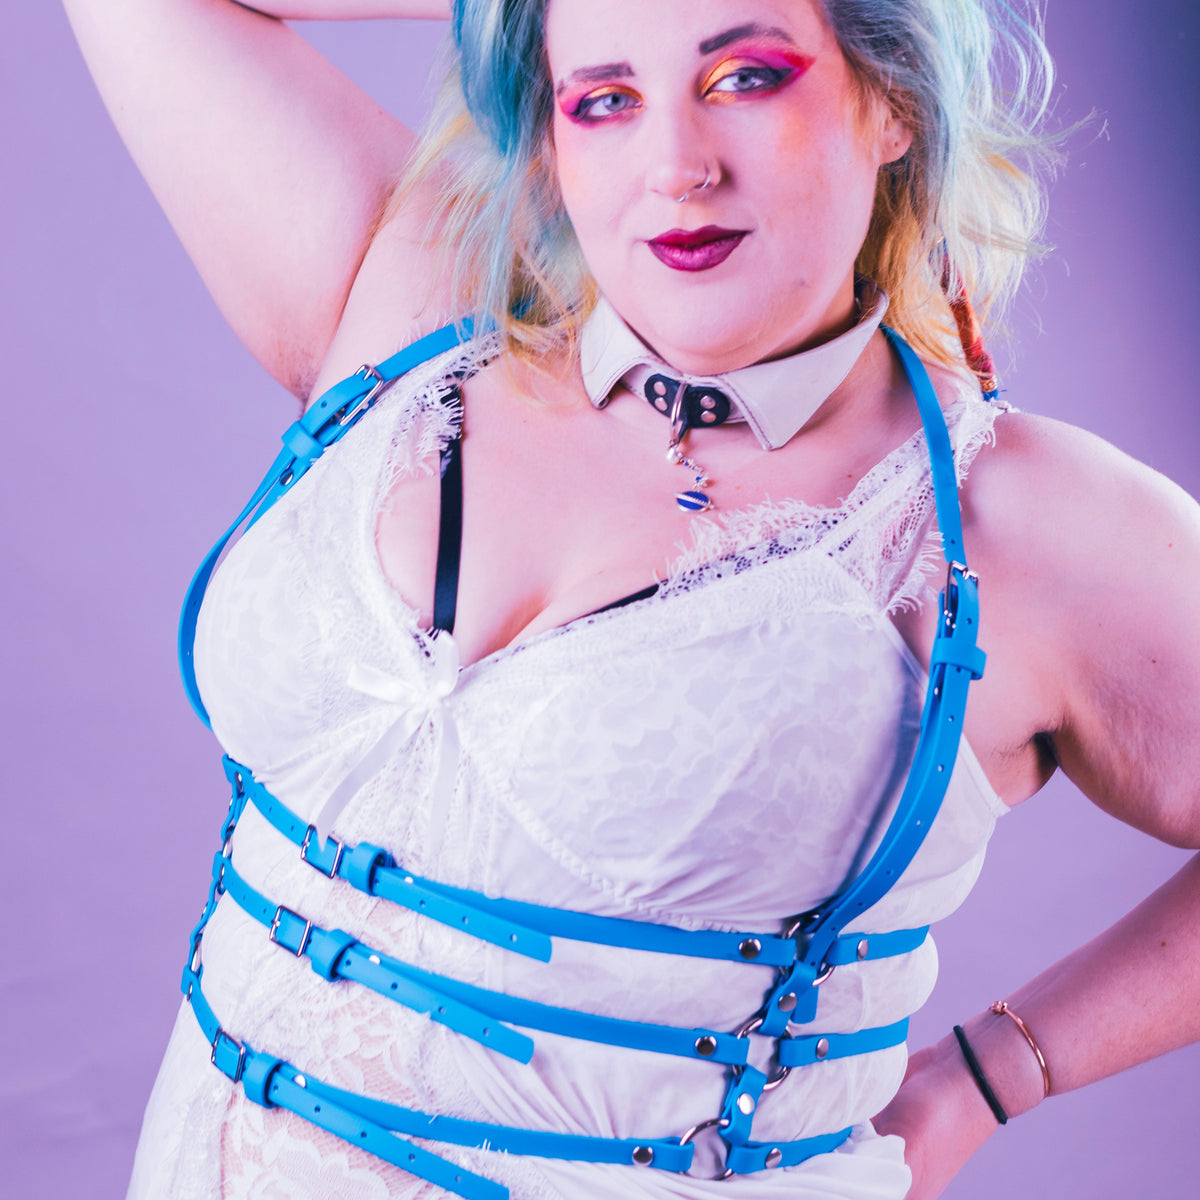 Woman wearing a turquoise suspender harness over a white negligee.